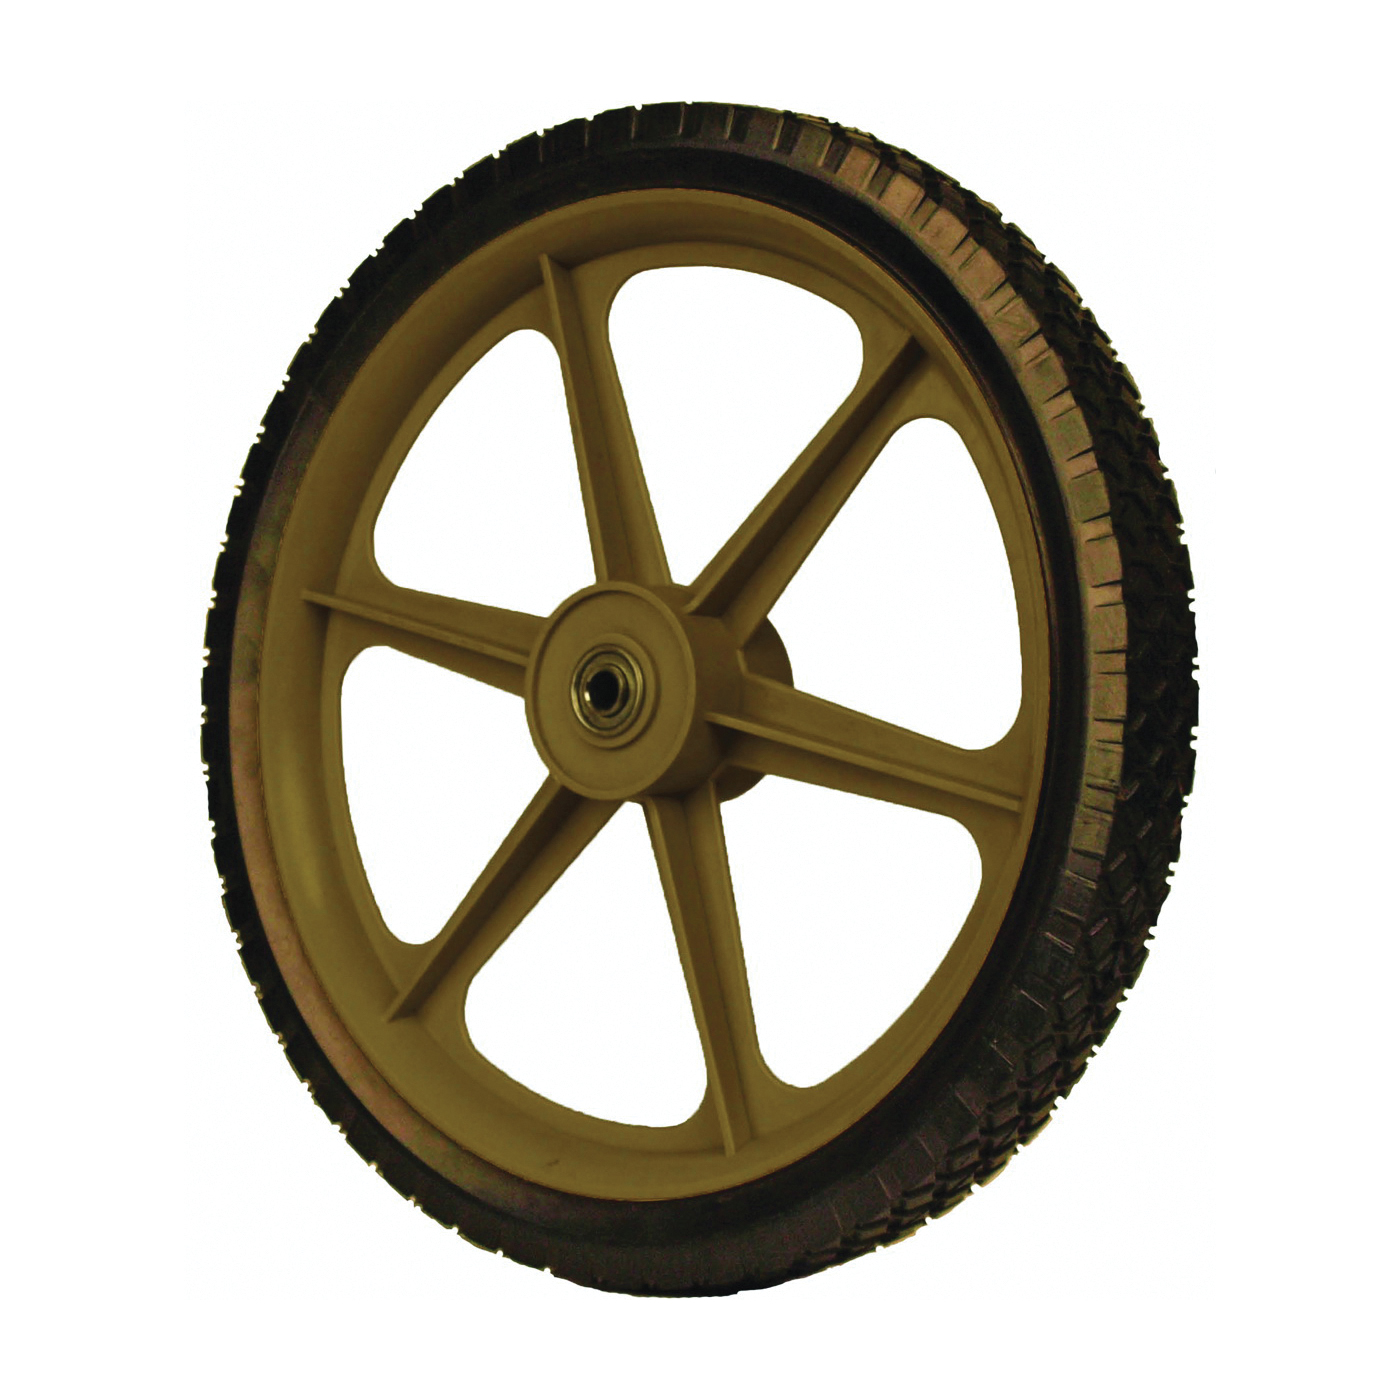 PLSP14D175 Lawn Mower Wheel, Plastic, For: Garden Carts, Wagons and Rotary Mowers